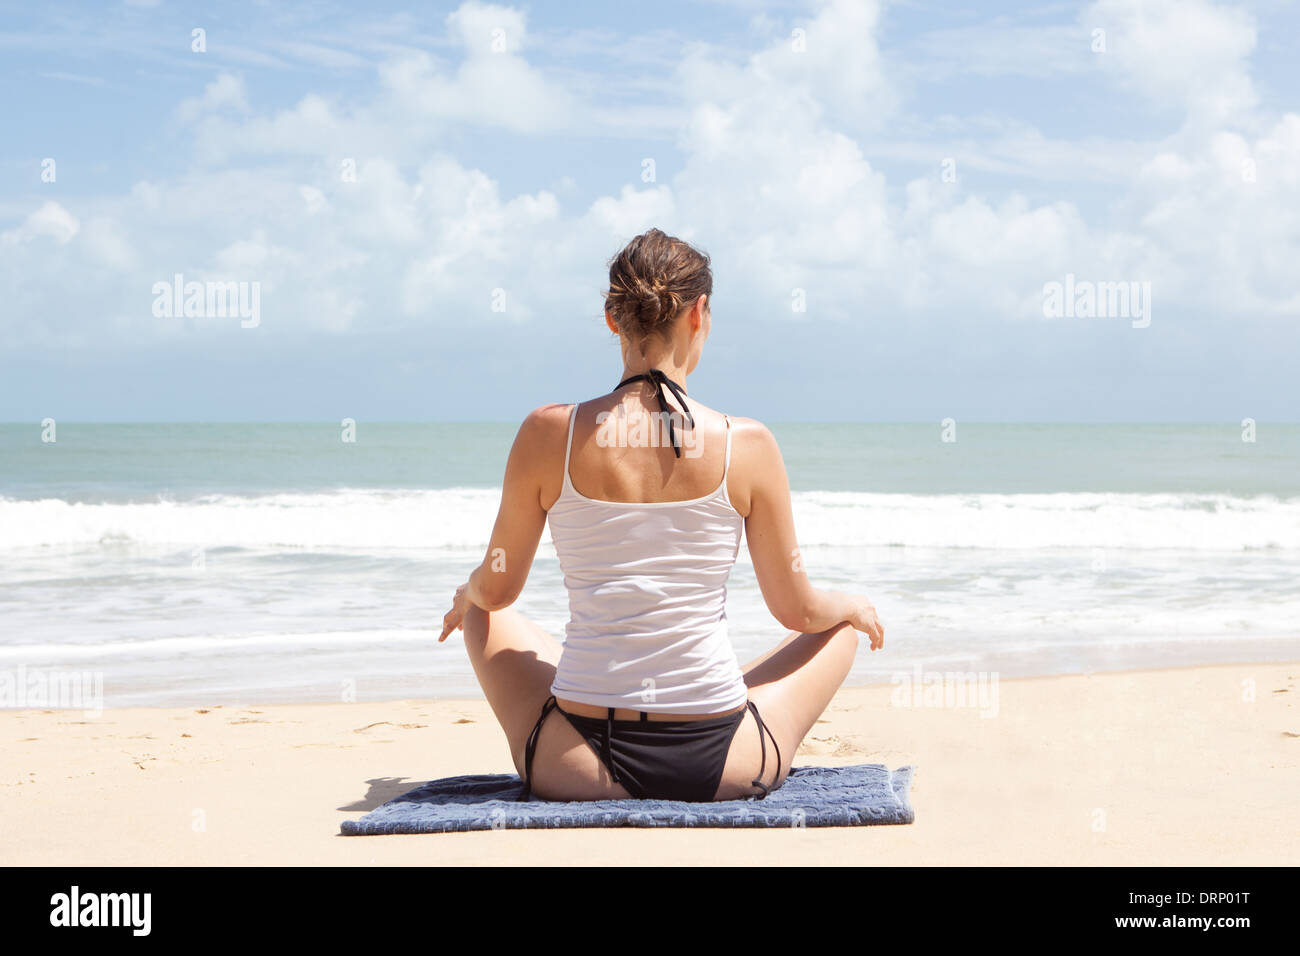 Do You Have to Sit Cross-Legged in Lotus Position to Meditate? - Gaiam